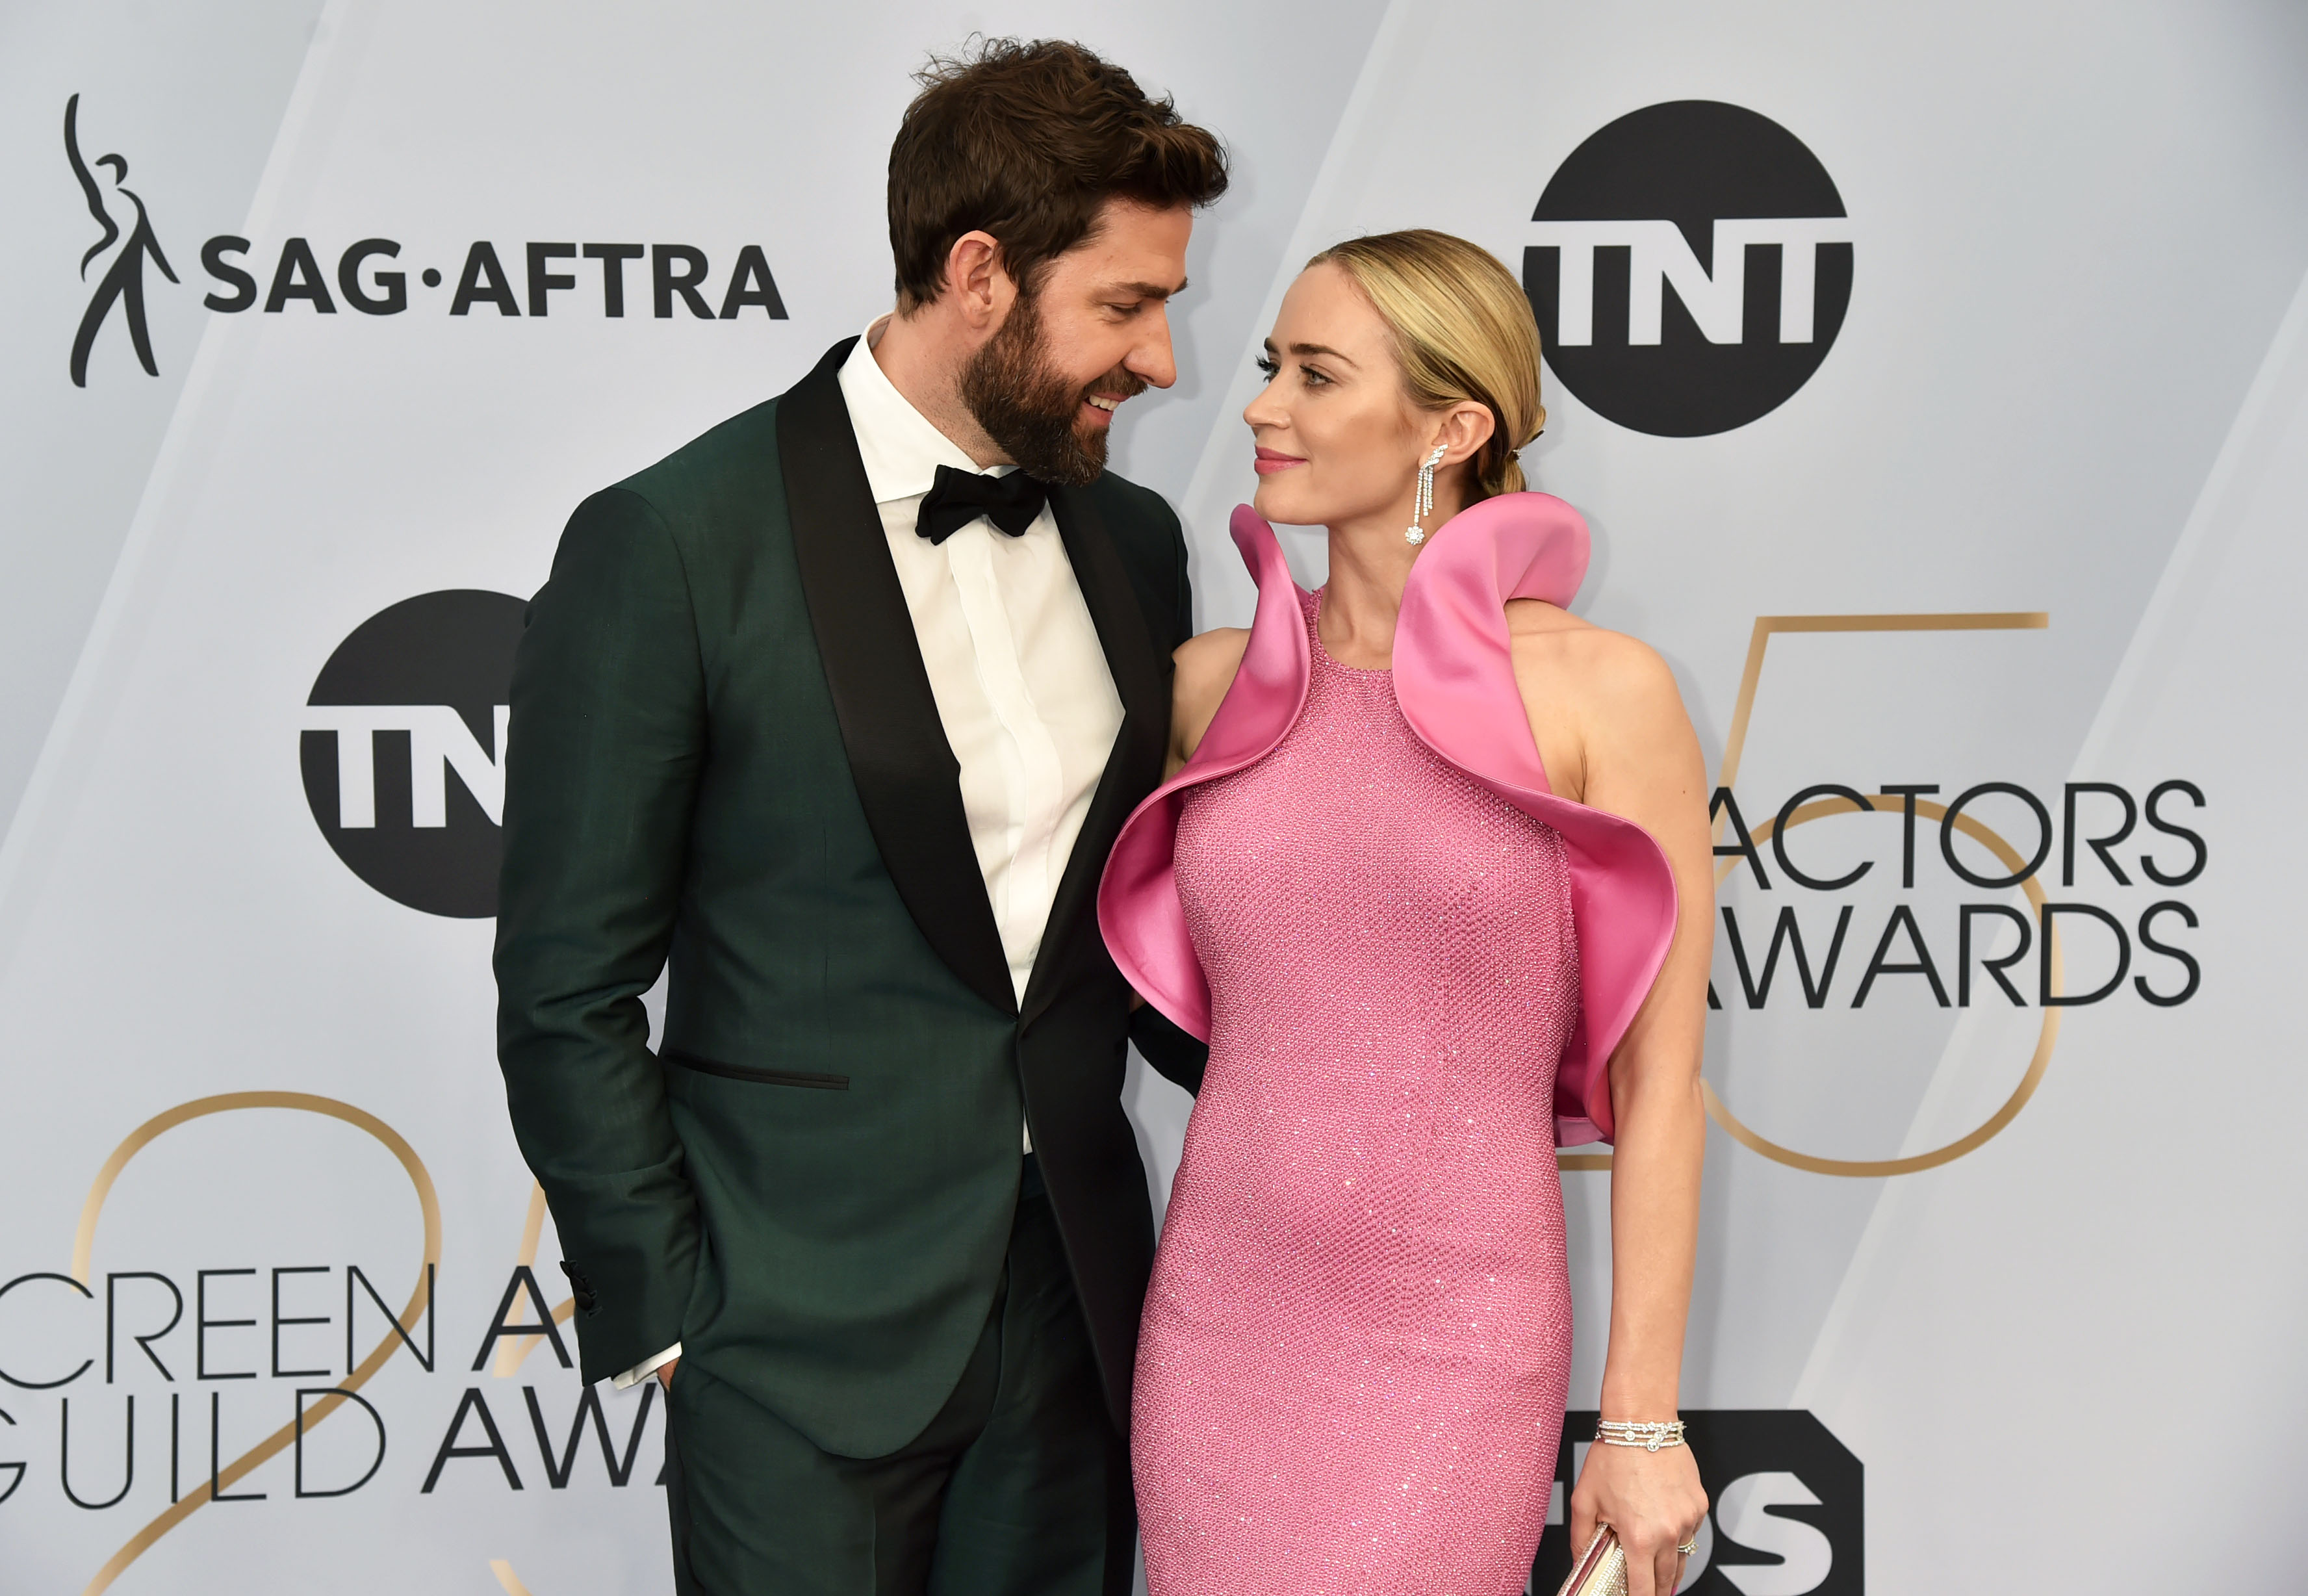 John Krasinski and Emily Blunt attend the 25th Annual Screen Actors Guild Awards at The Shrine Auditorium on January 27, 2019 in Los Angeles, California. (Jeff Kravitz&mdash;FilmMagic/Getty Images)